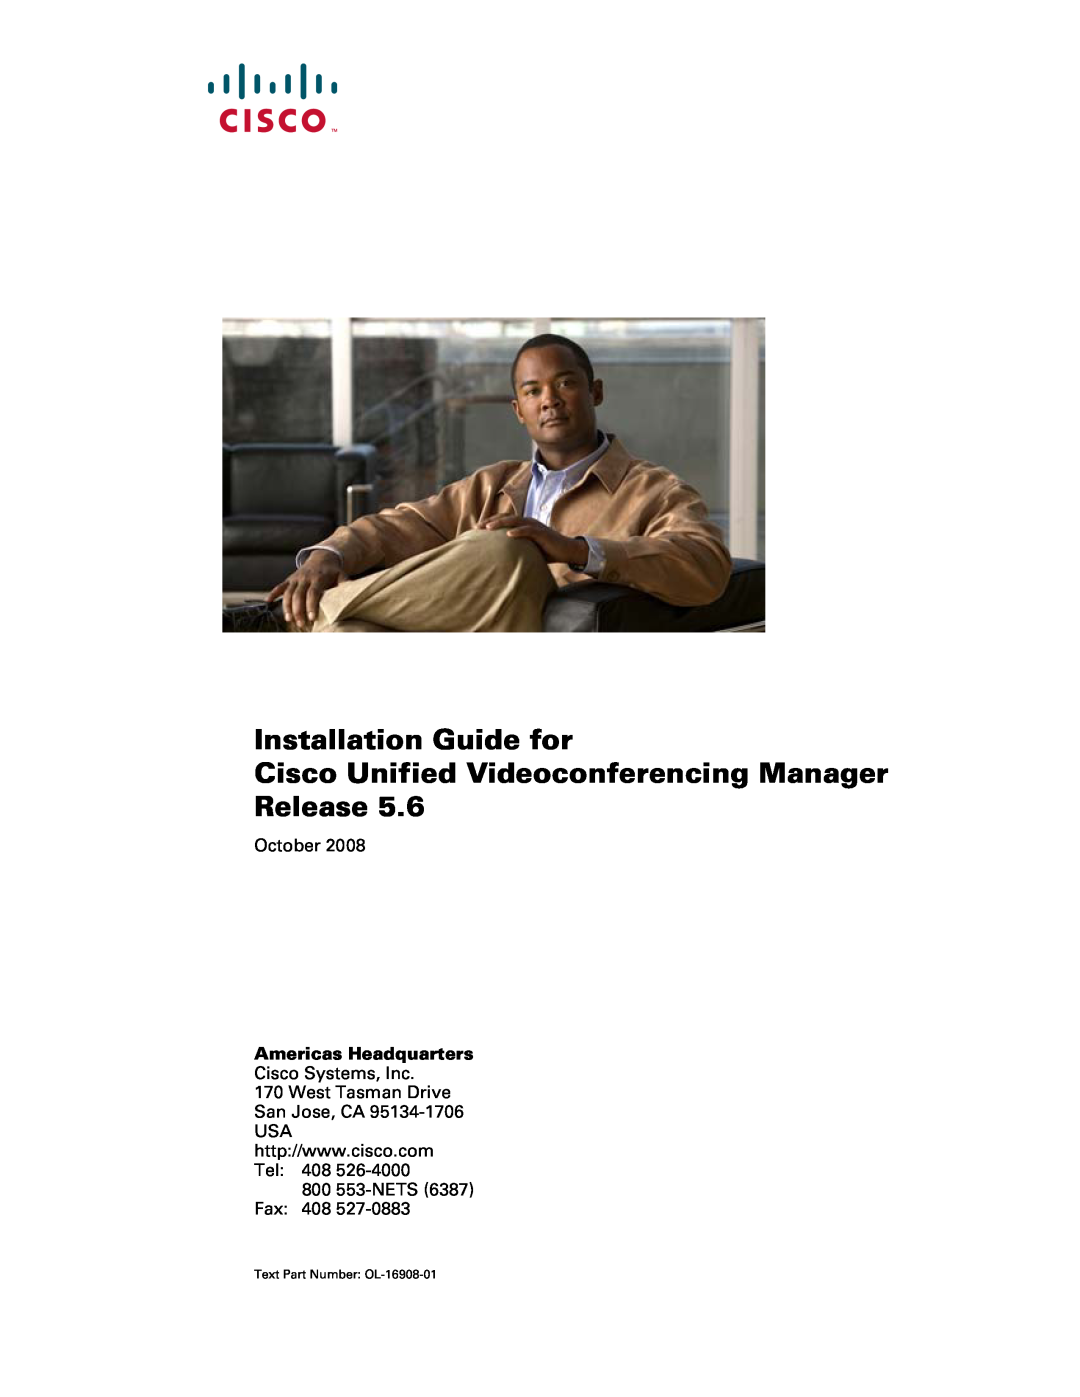 Cisco Systems Unified Videoconferencing Manager manual Americas Headquarters, Installation Guide for, October 